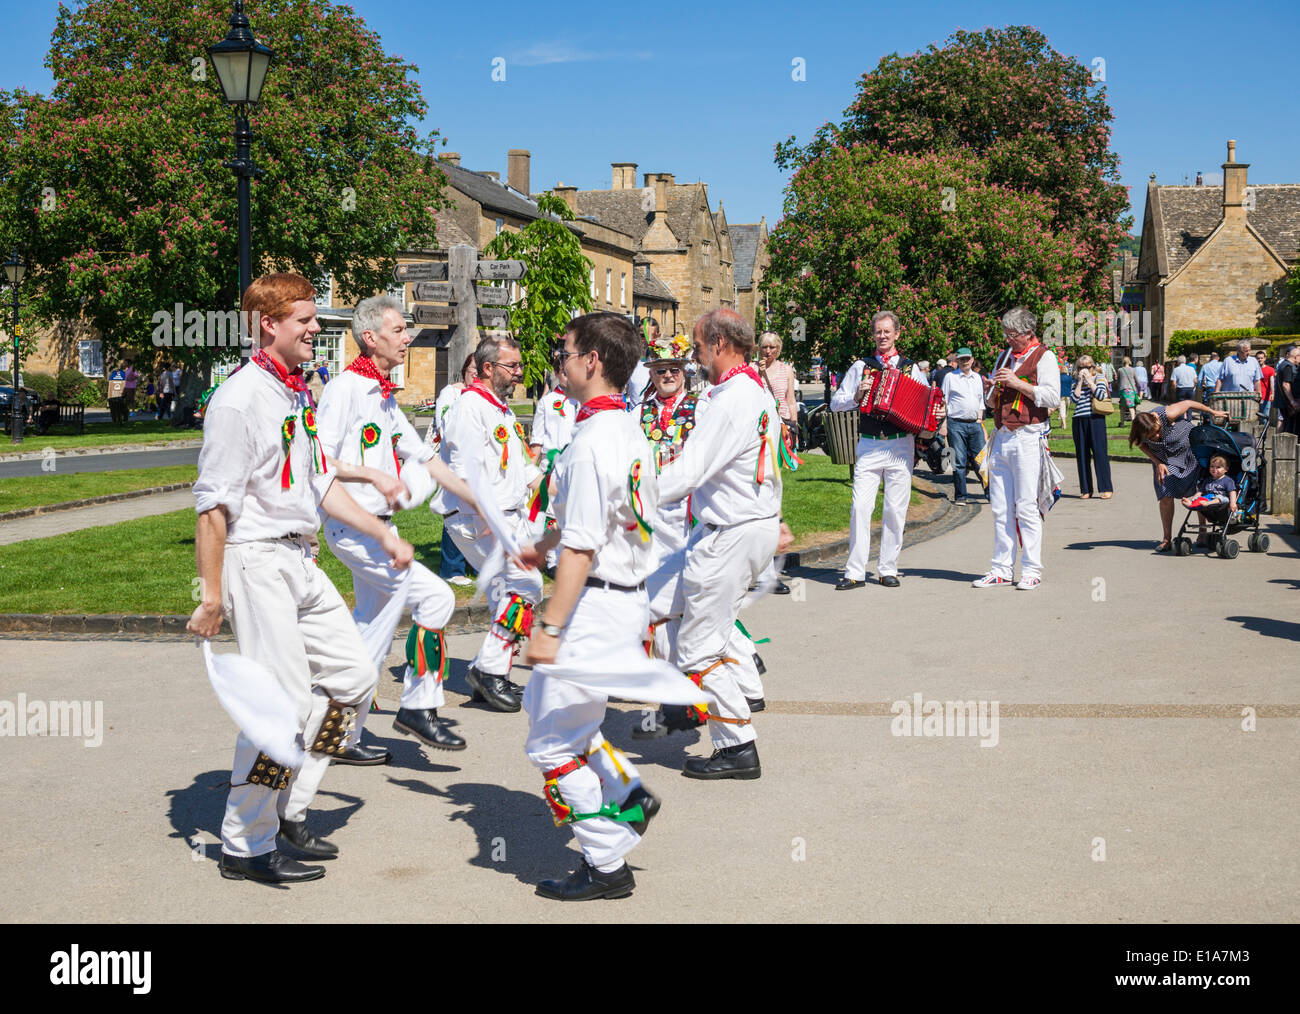 Morris Dancing in the Cotswolds Village of Broadway, The Cotswolds, Worcestershire, England, UK, EU, Europe Stock Photo